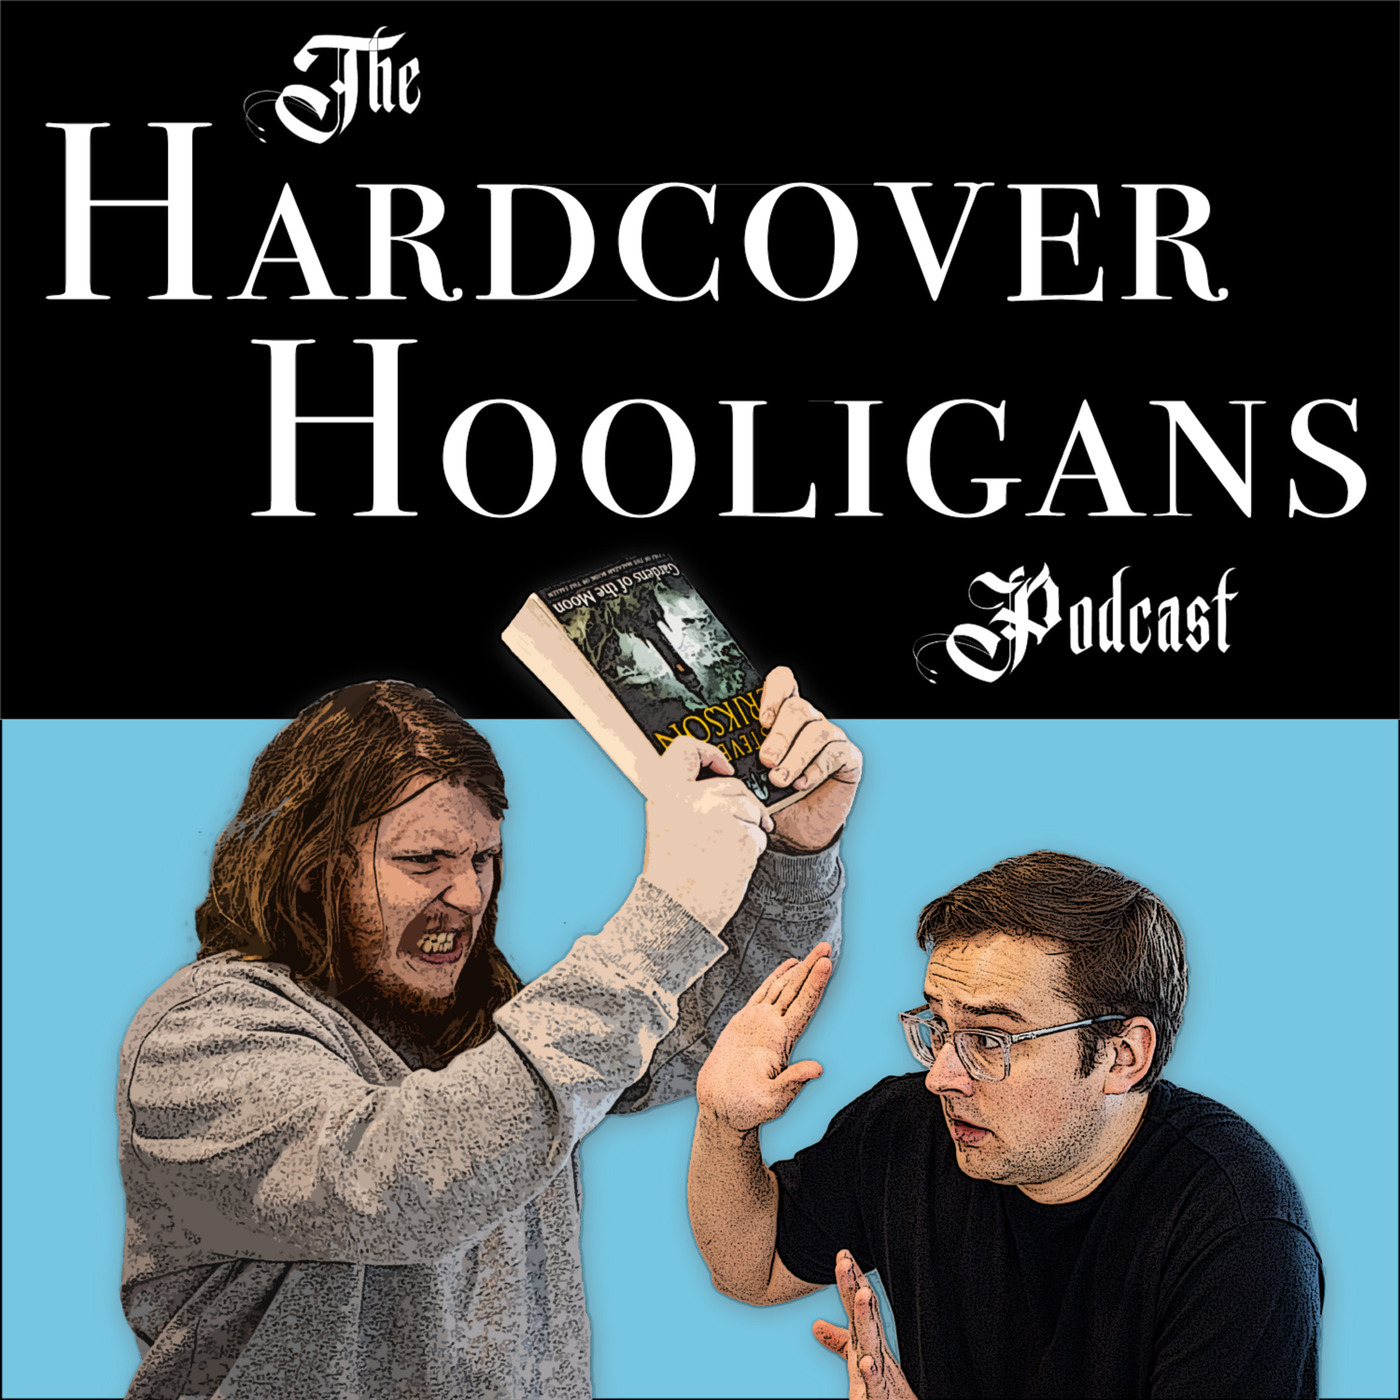 Hardcover Hooligans ep013-thehobbit: How To Rob People With Riddles (The Hobbit)